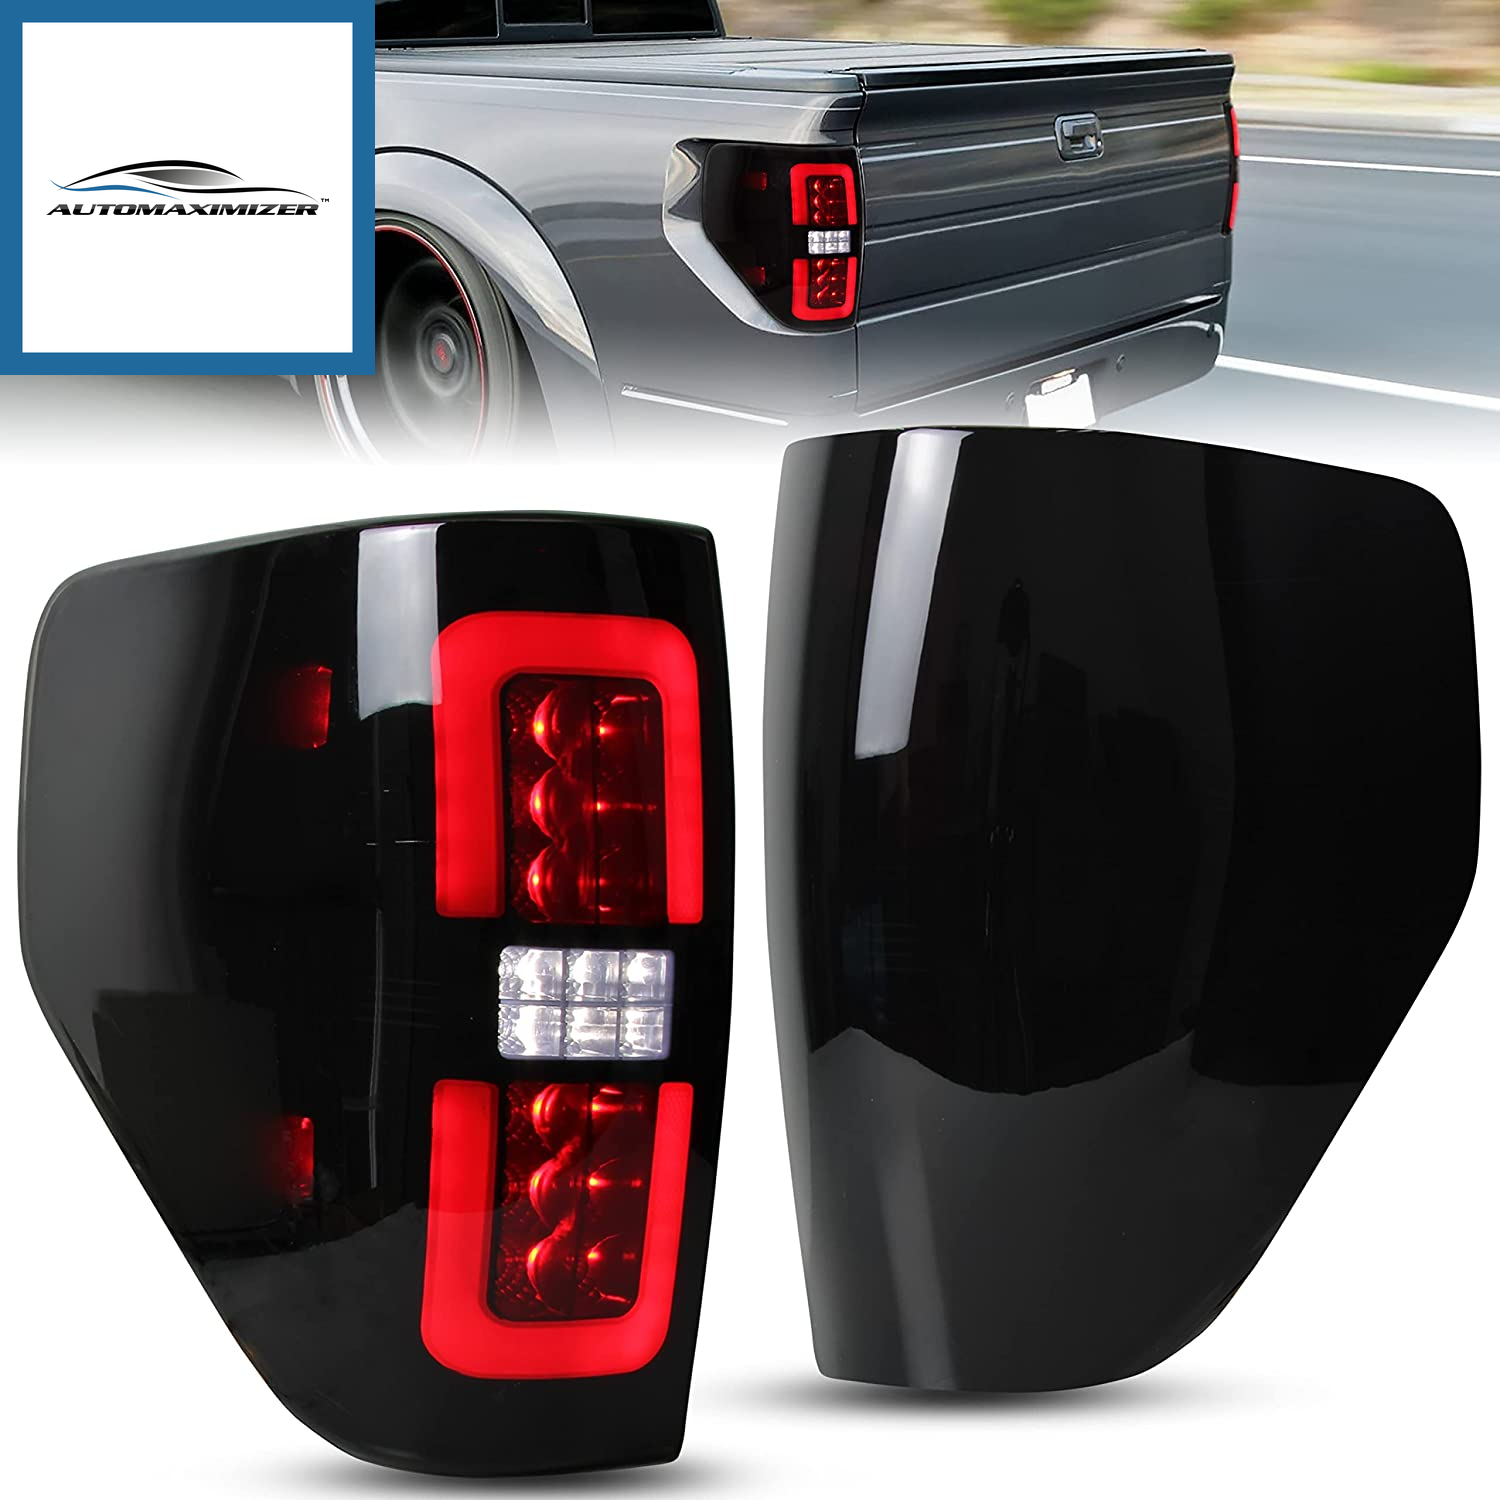 LED Tail Lights for Ford F150 09-14, New Upgrade Black Full LED Taillights Rear Brake Stop Lamps for Ford F-150 2009-2014 Accessories (2PCS, Passenger & Driver Side)